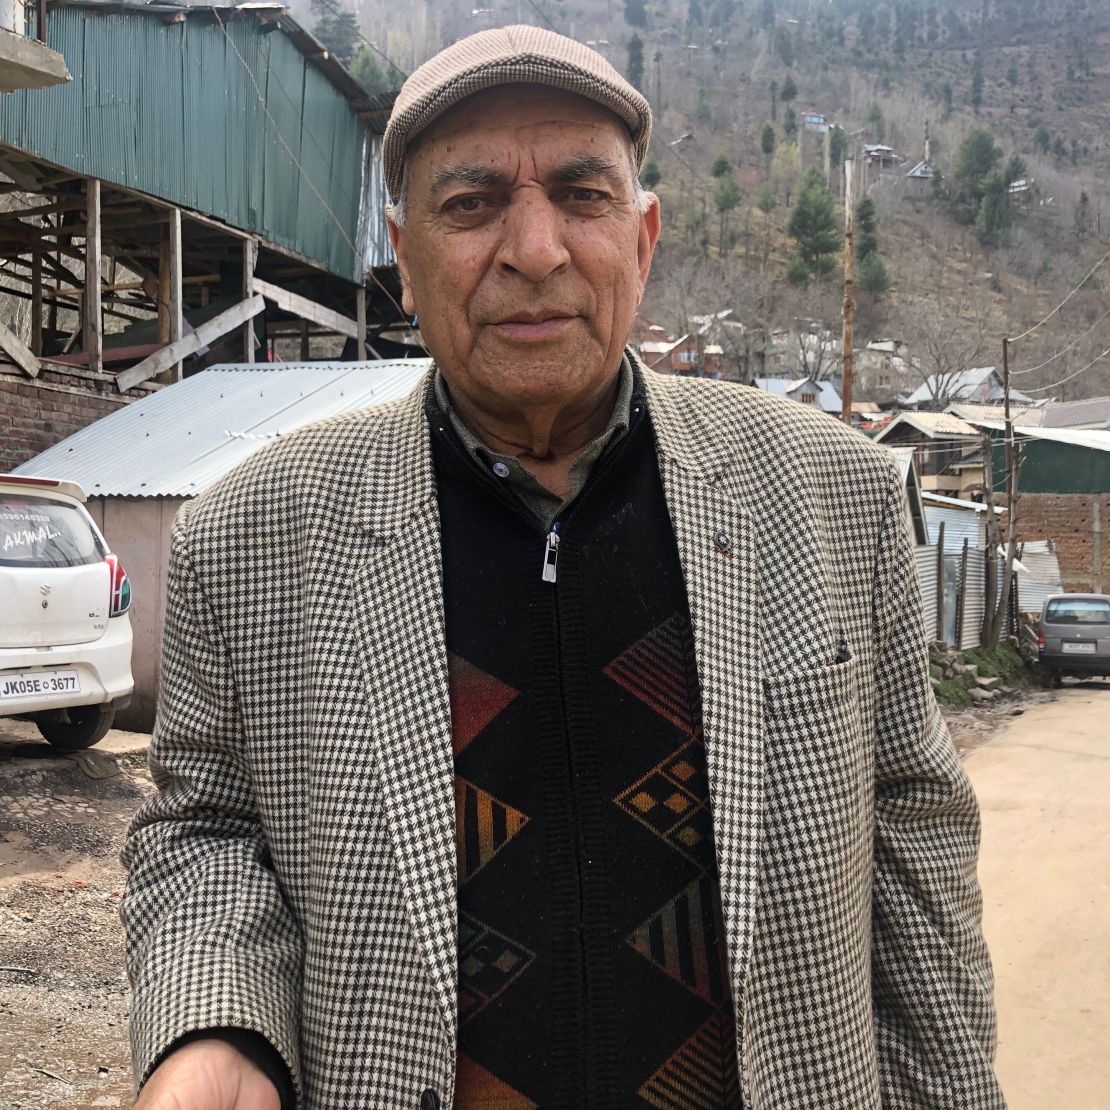 Kashmir resident Gulam Rasul has given up dreaming of peace.